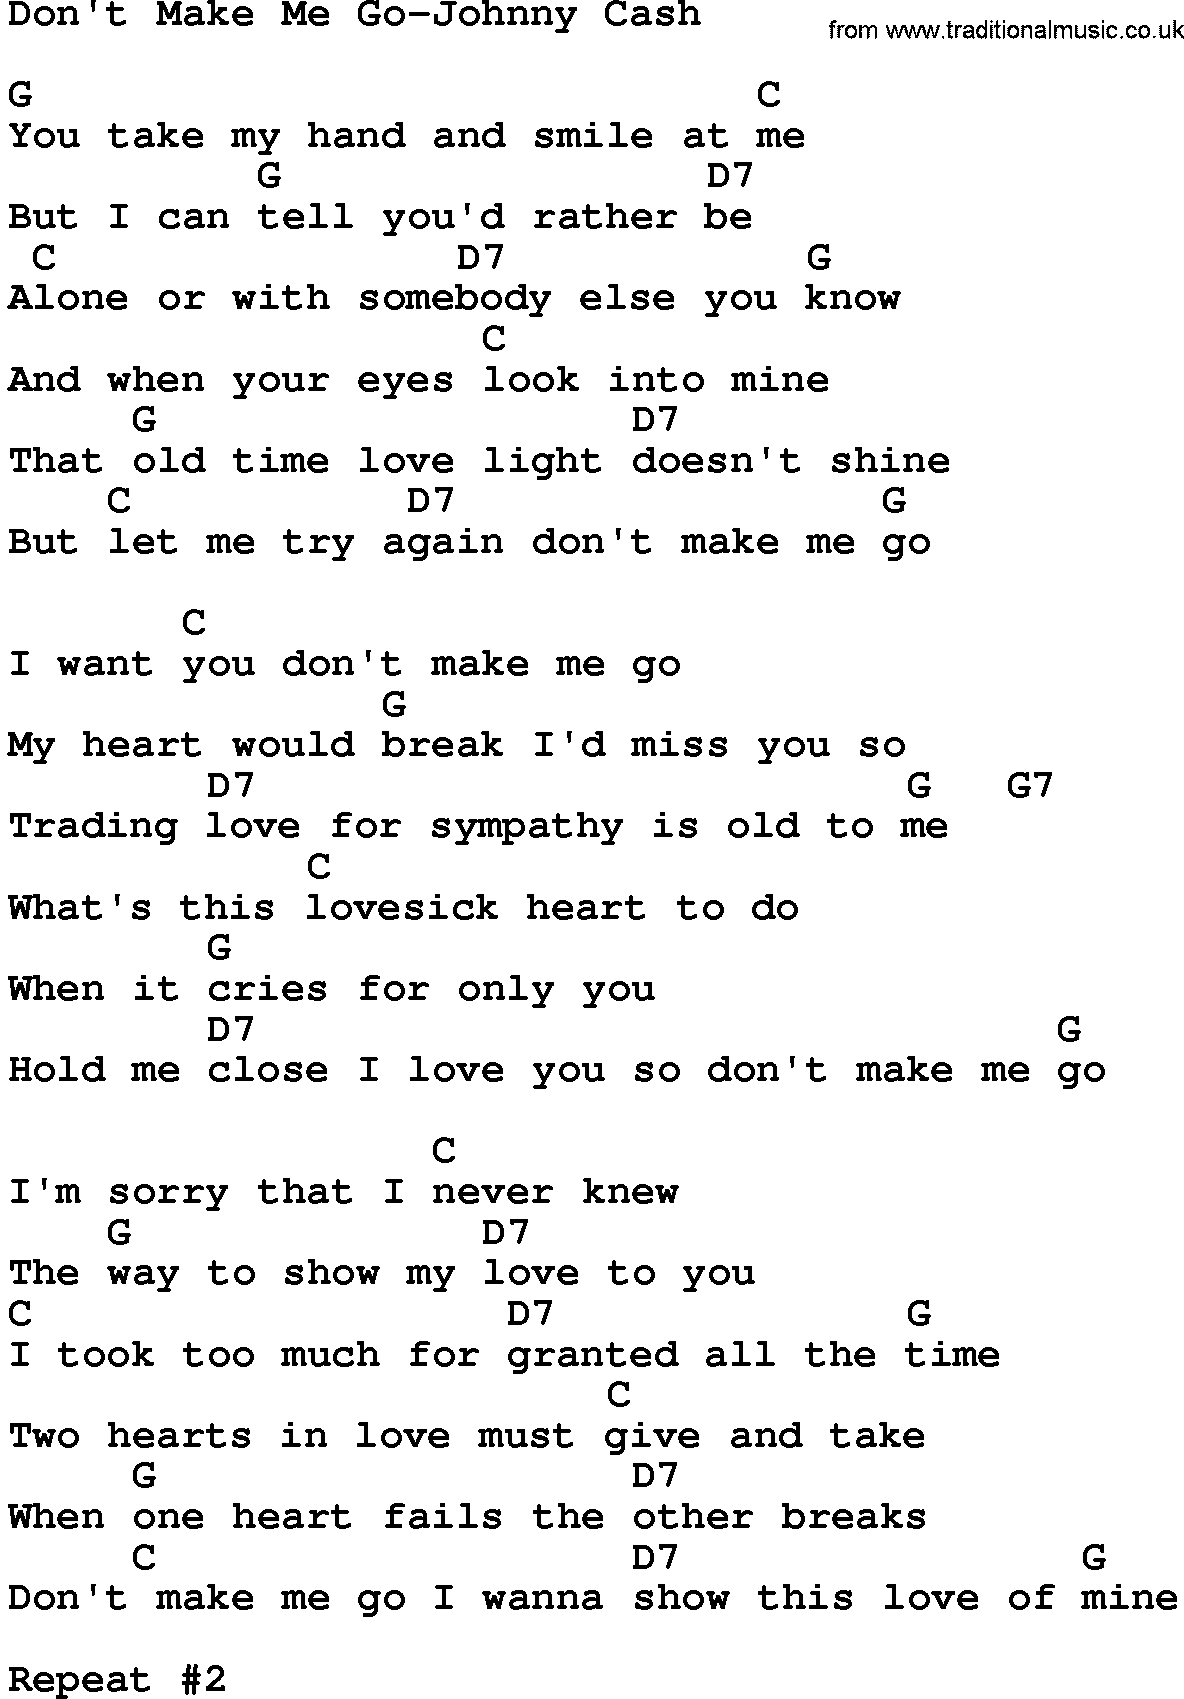 Country music song: Don't Make Me Go-Johnny Cash lyrics and chords